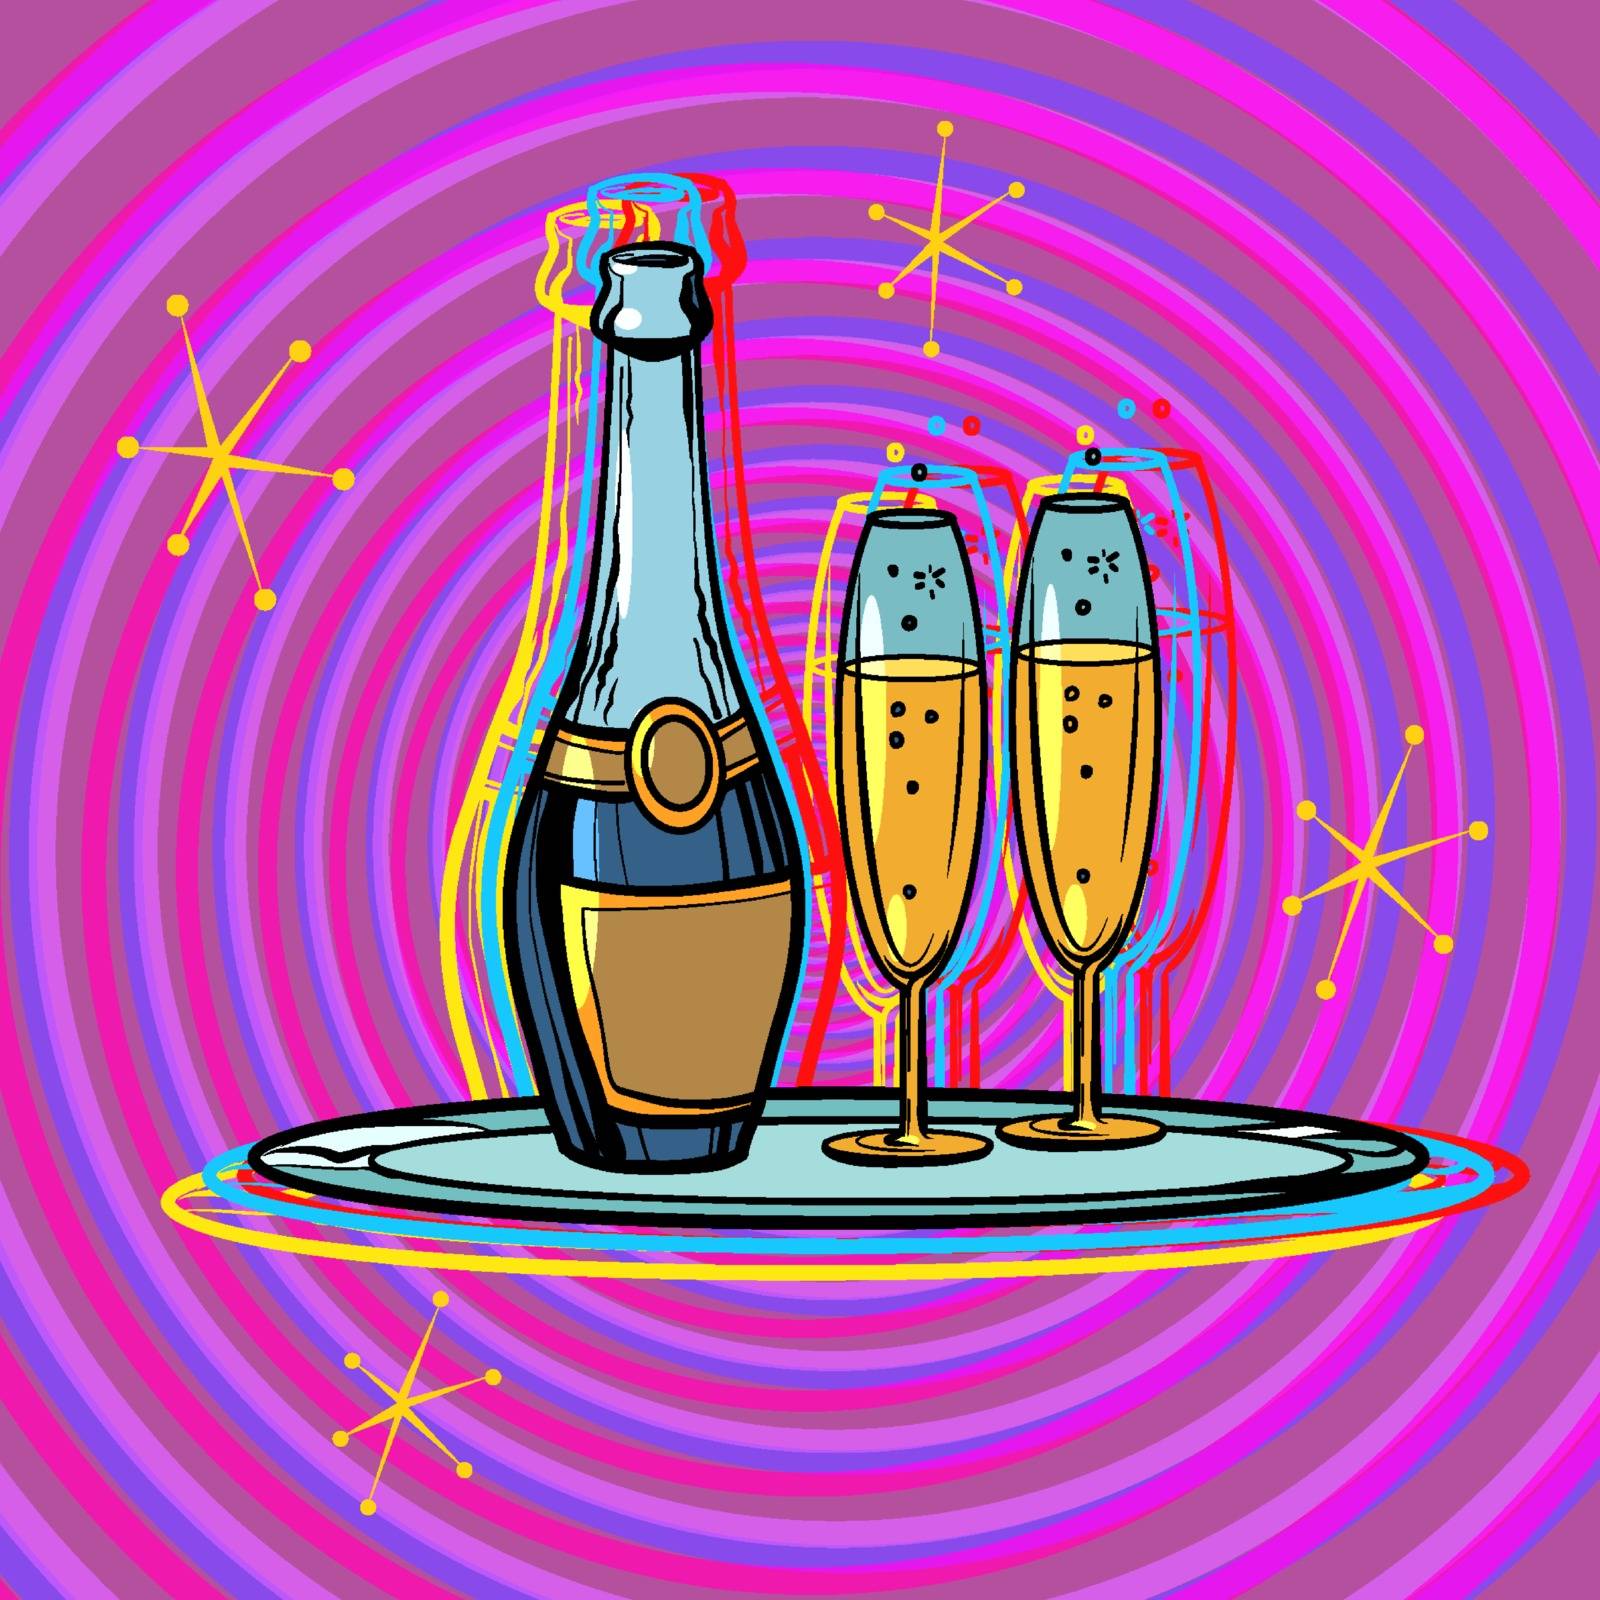 A bottle of champagne with glasses on a tray. Celebration. Pop art retro vector illustration vintage kitsch 50s 60s